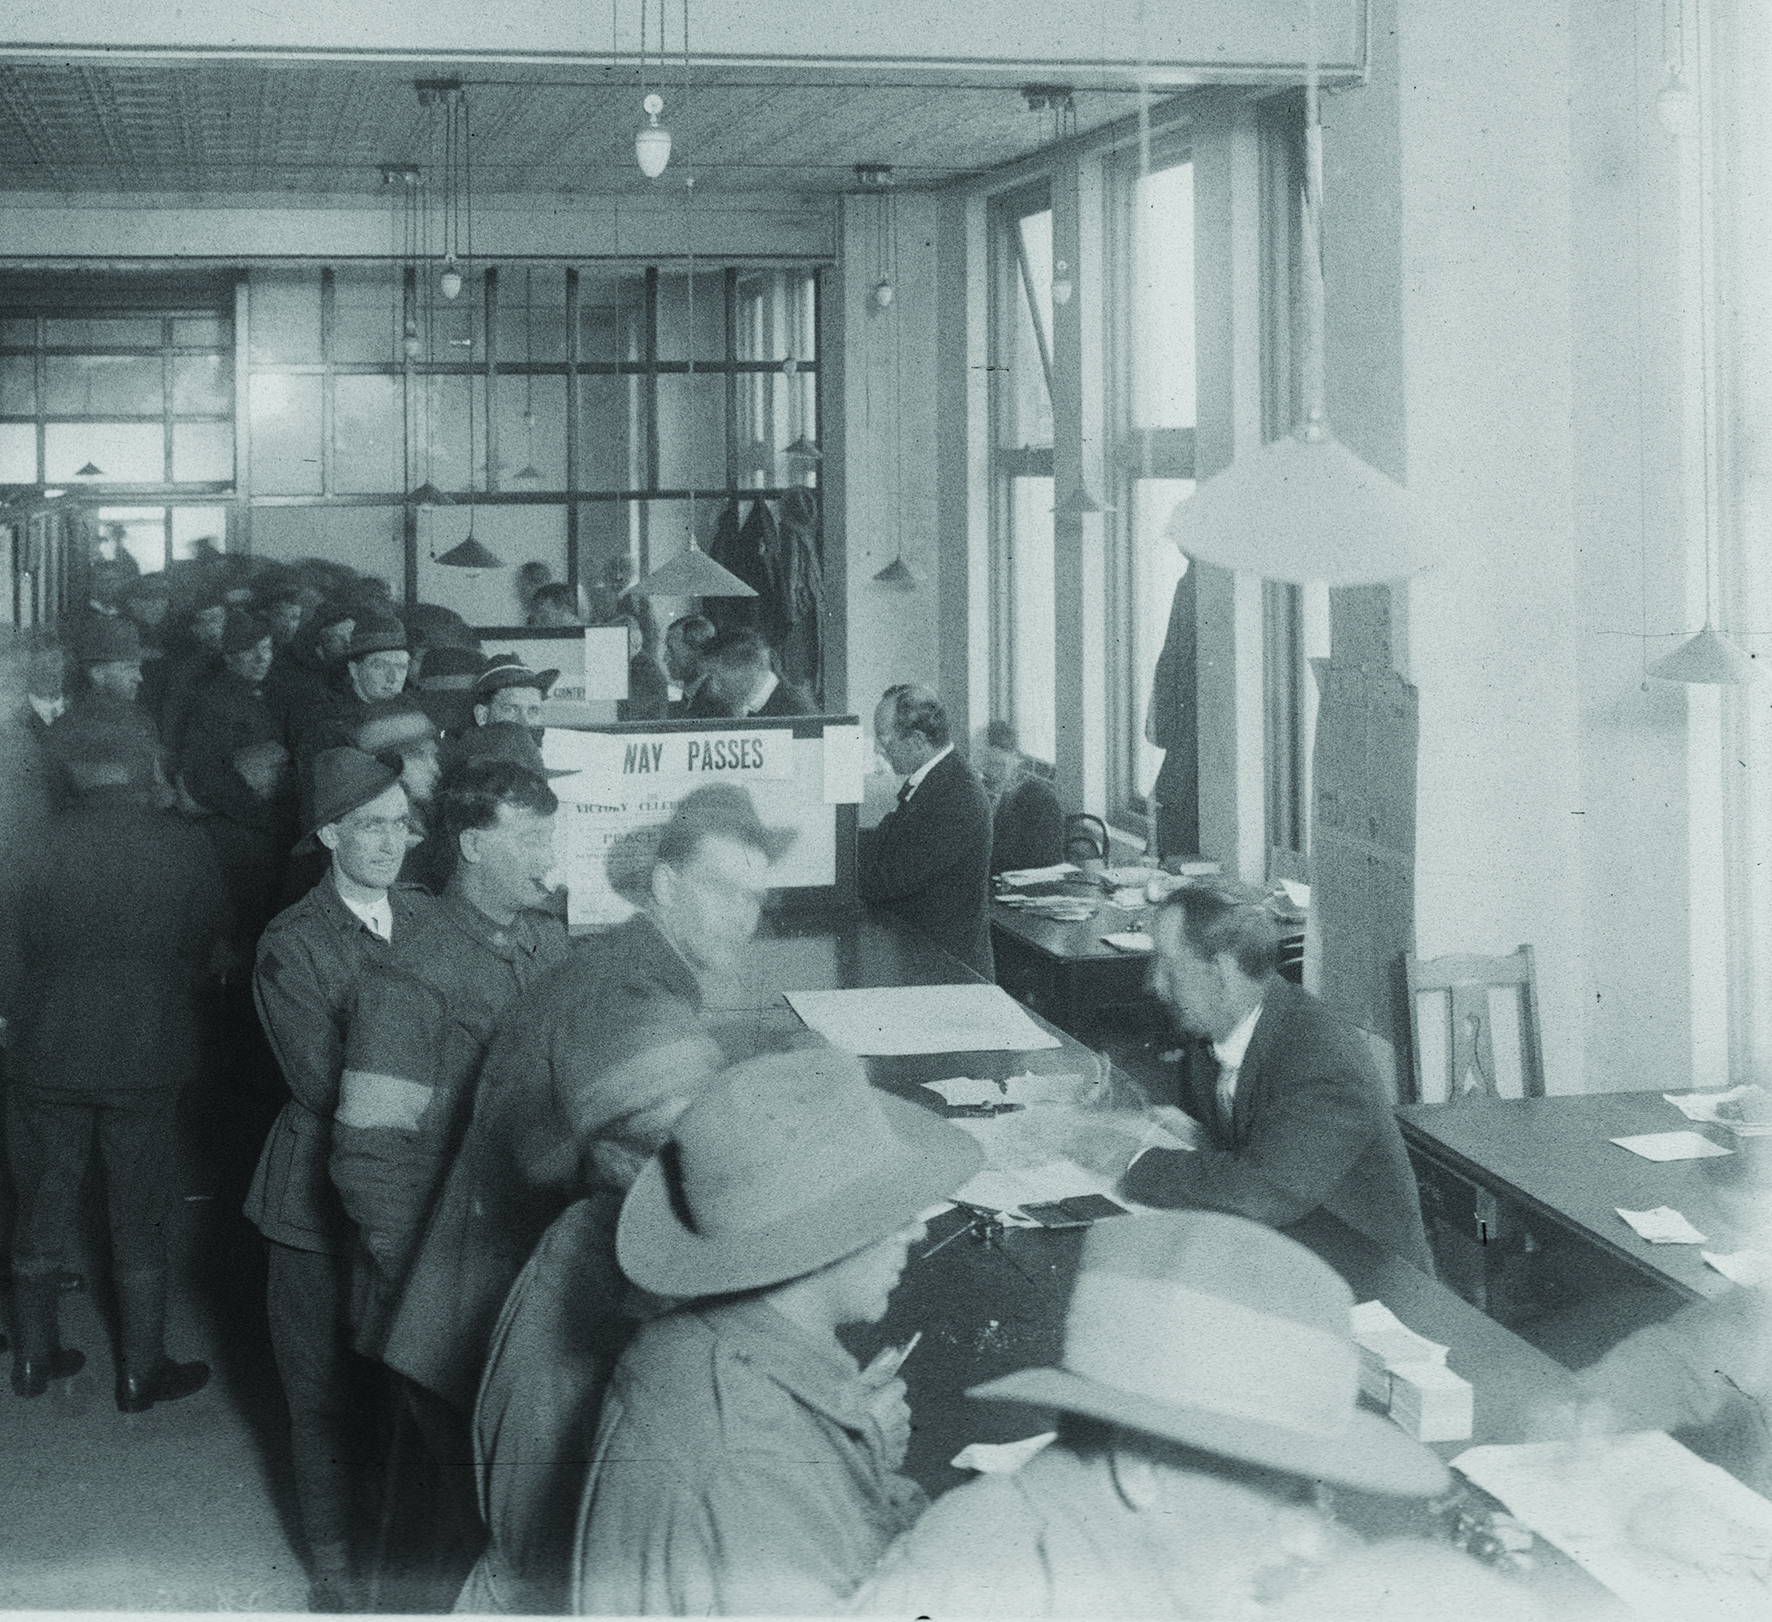 Returned servicemen queued inside the Repatriation Office in June 1919 to get information on their benefits